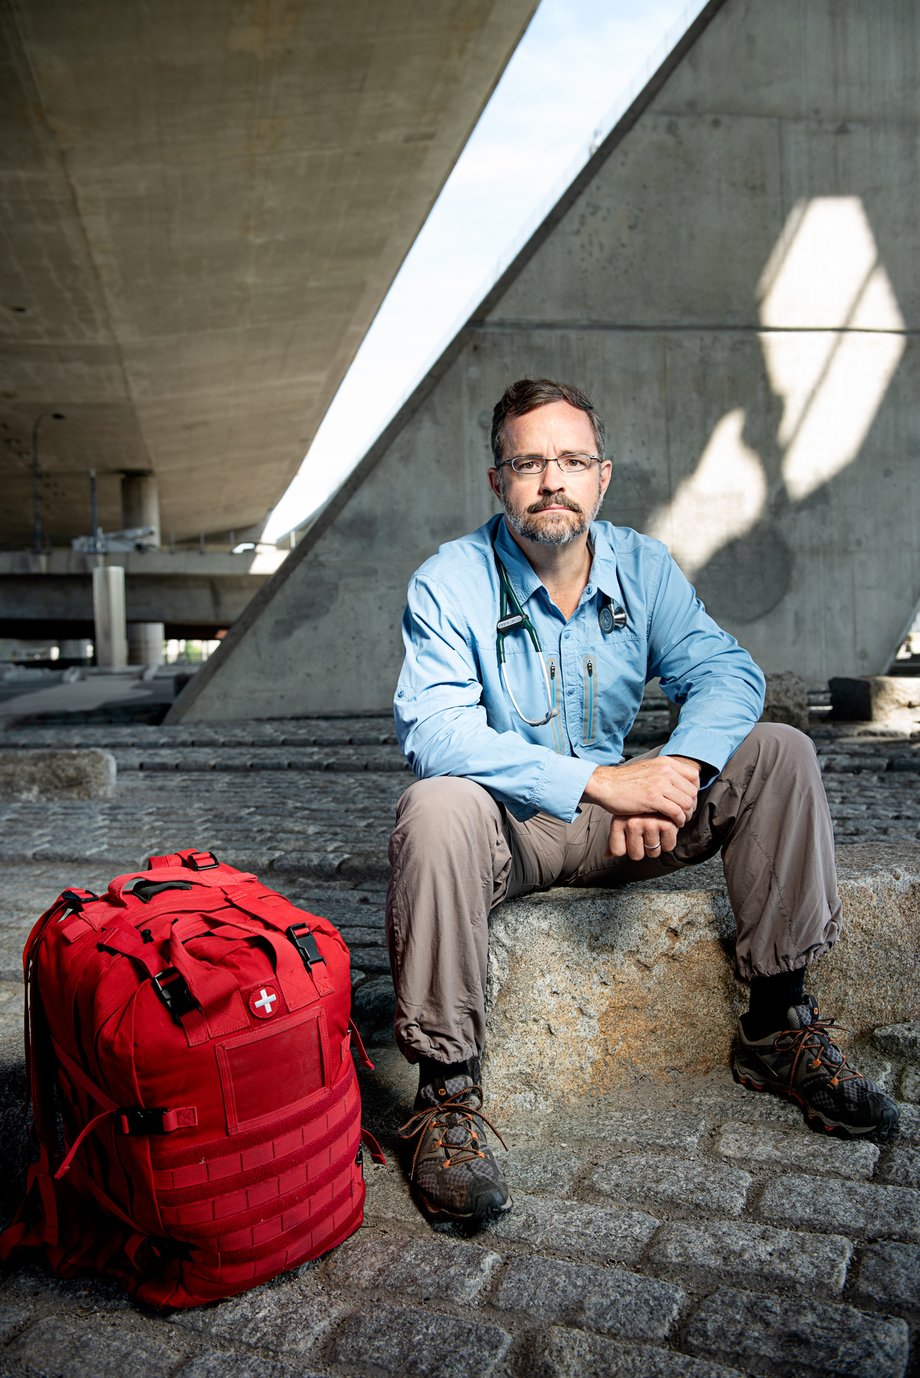 Webb Chappell's portrait of Dr. Harris, sitting on a rock beneath an underpass with a large, red medical bag